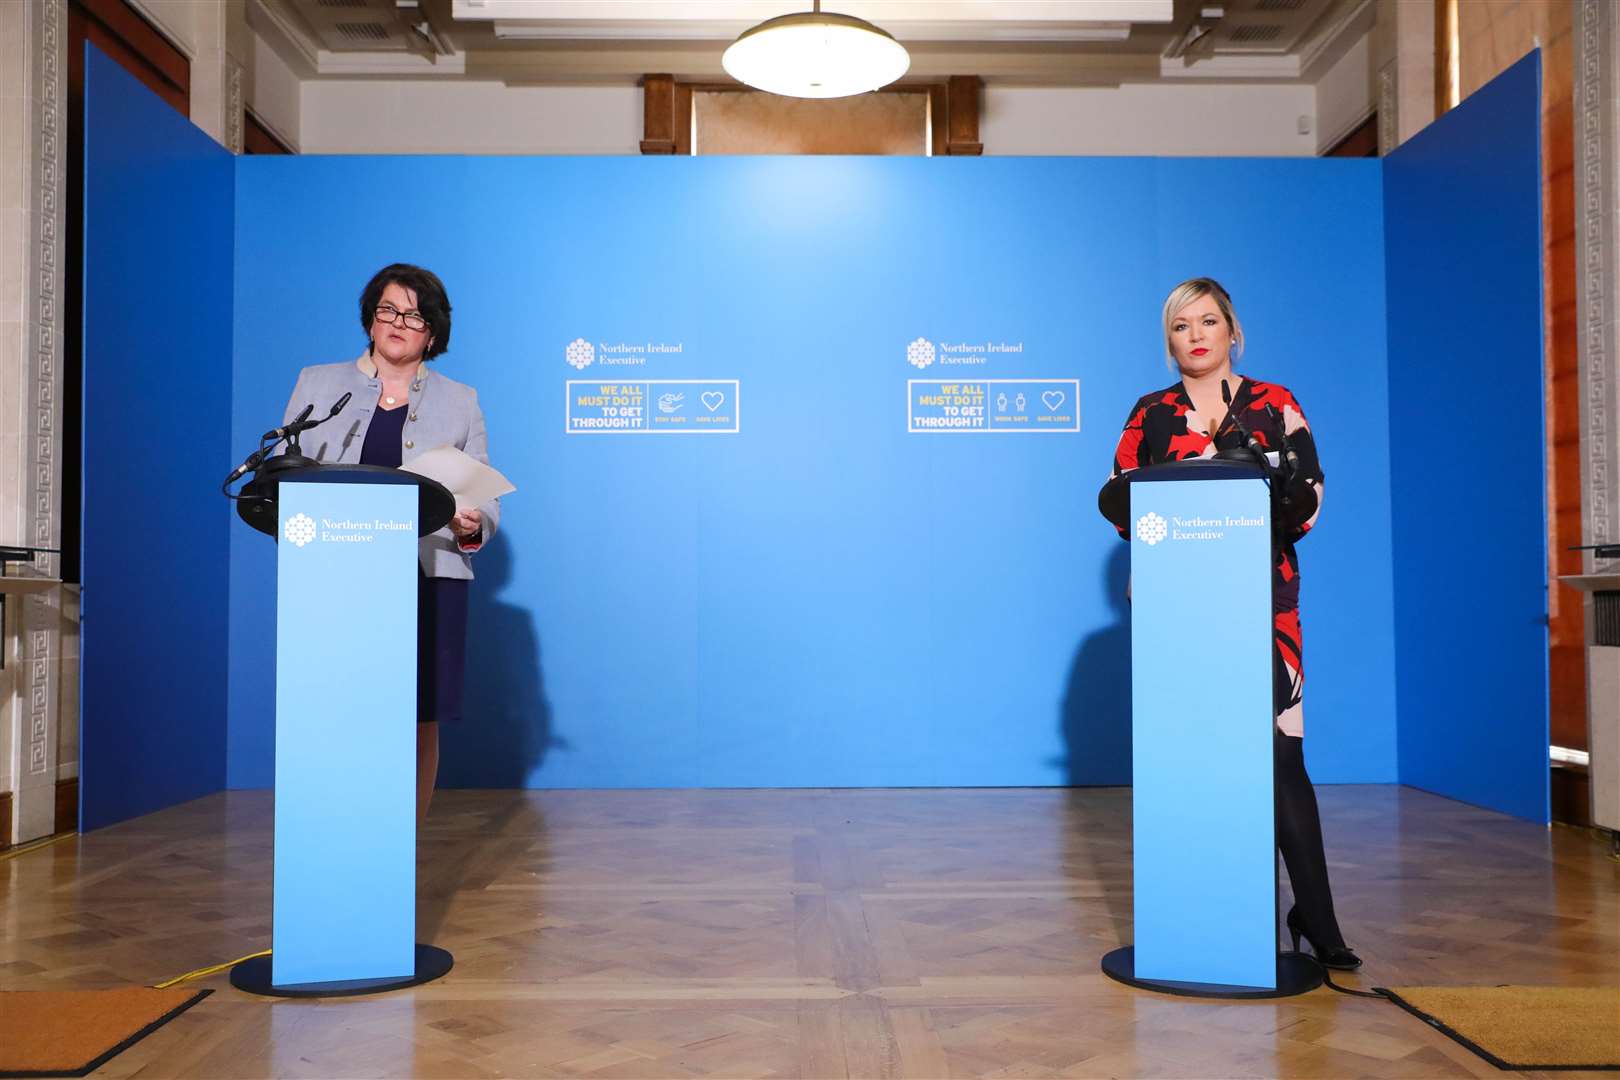 Arlene Foster and Michelle O’Neill’s last joint press conference on June 29 (Presseye/PA)